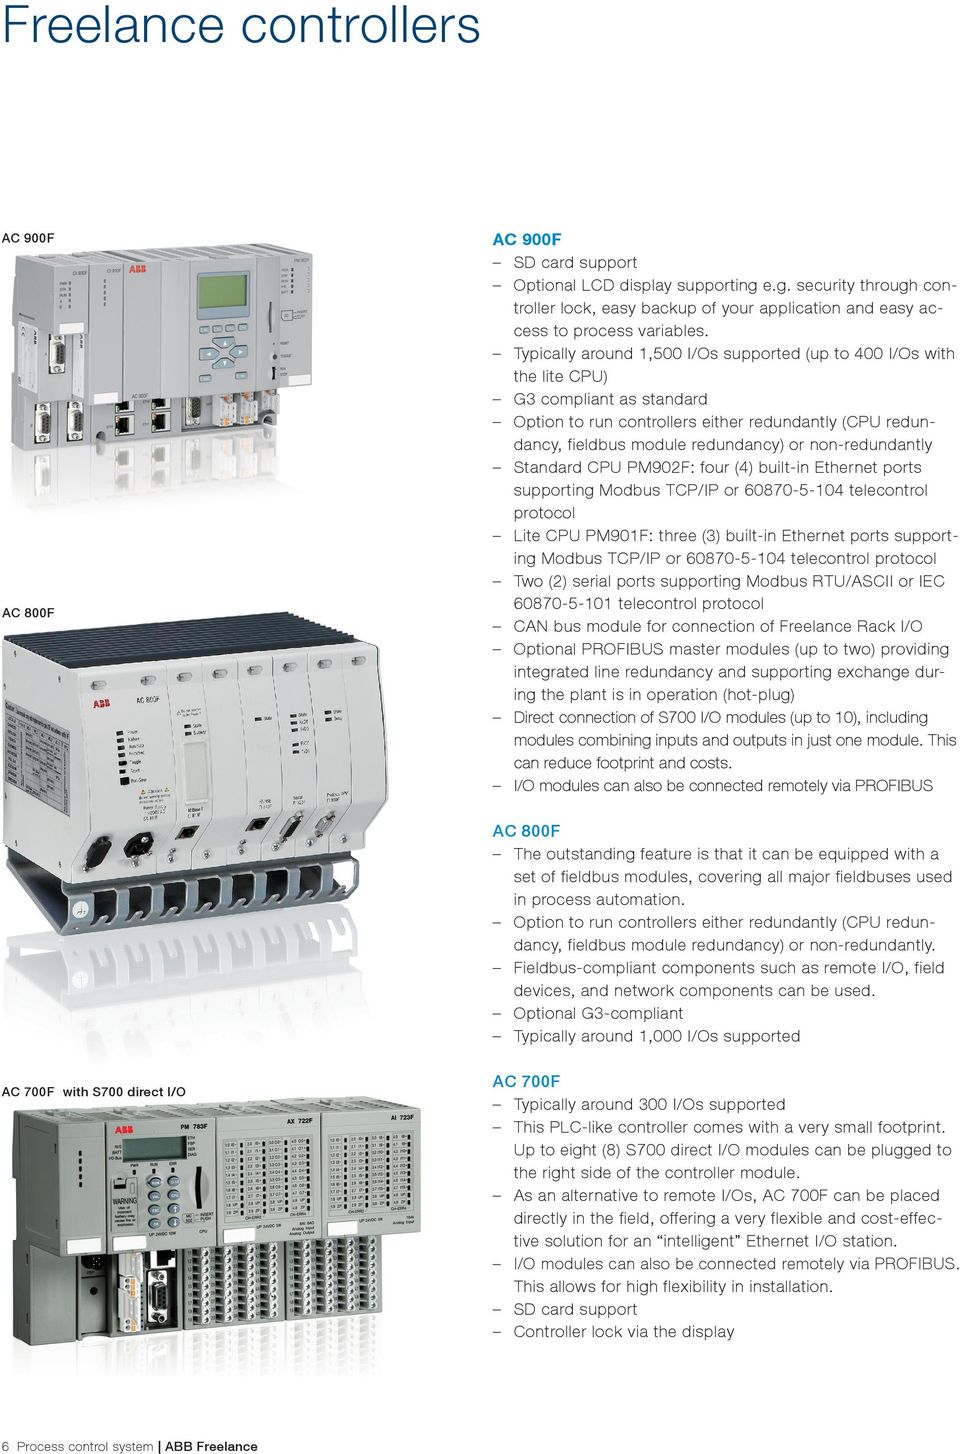 non-redundantly Standard CPU PM902F: four (4) built-in Ethernet ports supporting Modbus TCP/IP or 60870-5-104 telecontrol protocol Lite CPU PM901F: three (3) built-in Ethernet ports supporting Modbus